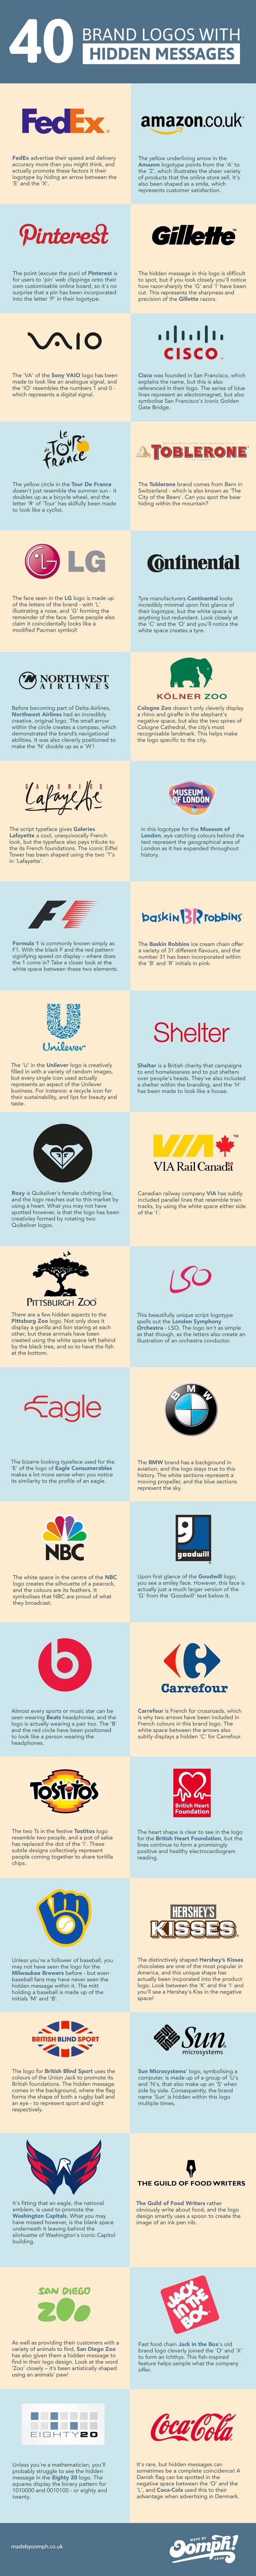 The hidden meaning behind 40 famous logos